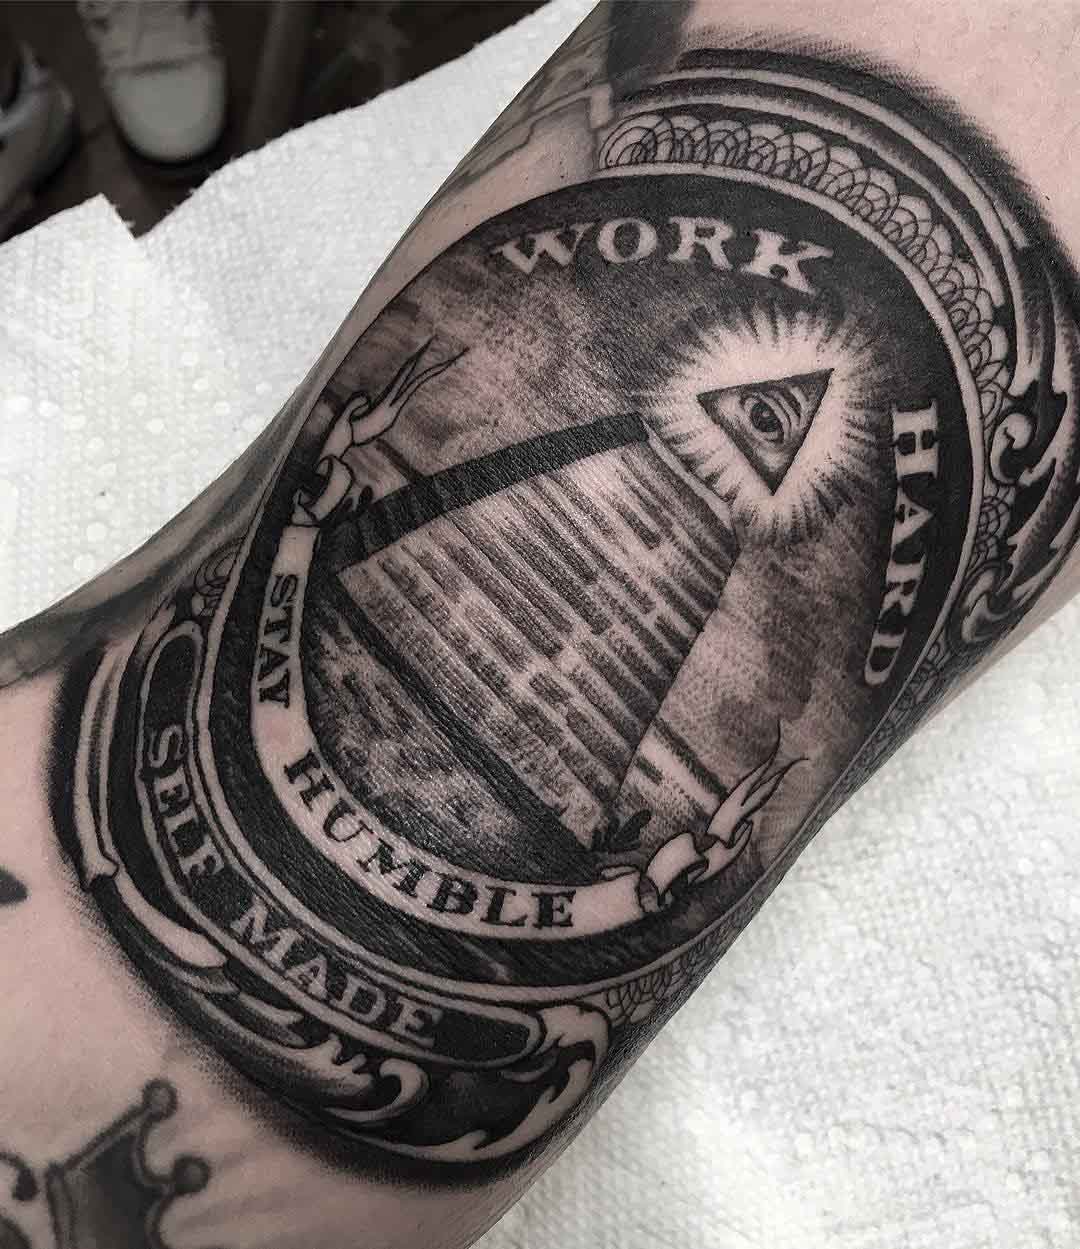 Pyramid with all seeing eye tattoo (Wylde Sydes Tattoo) - YouTube